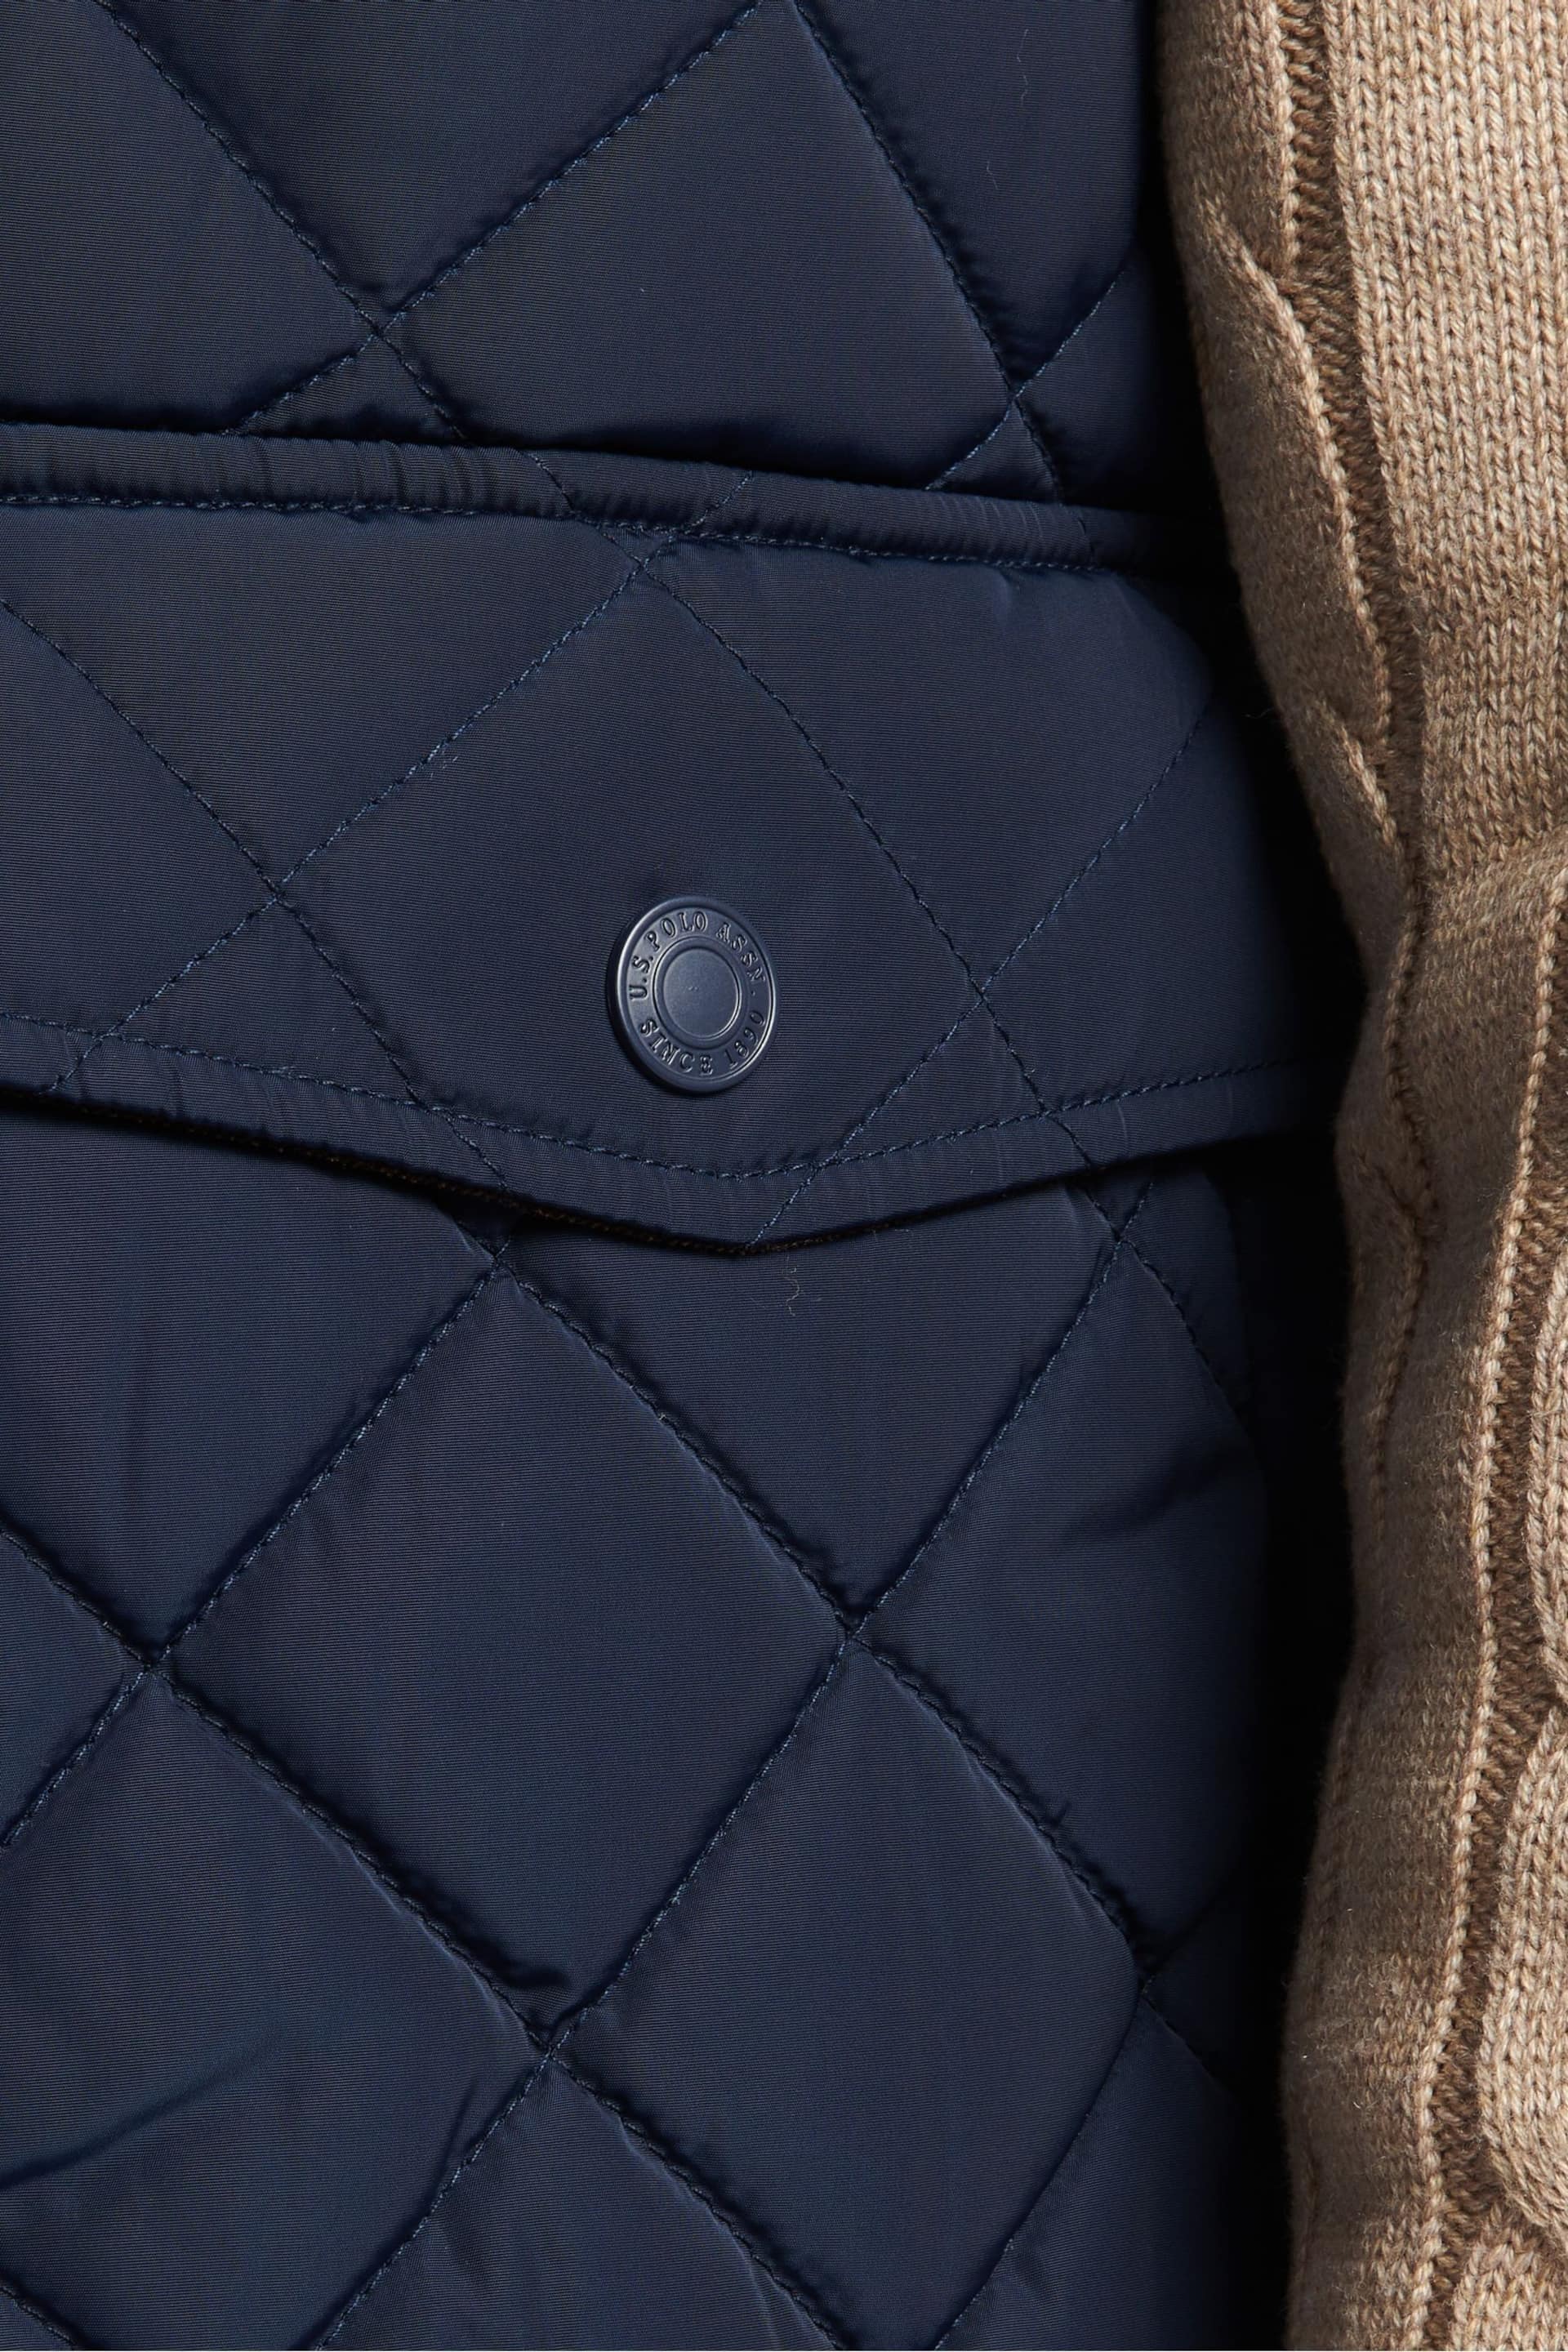 U.S. Polo Assn. Mens Blue Quilted Hacking Gilet - Image 5 of 8